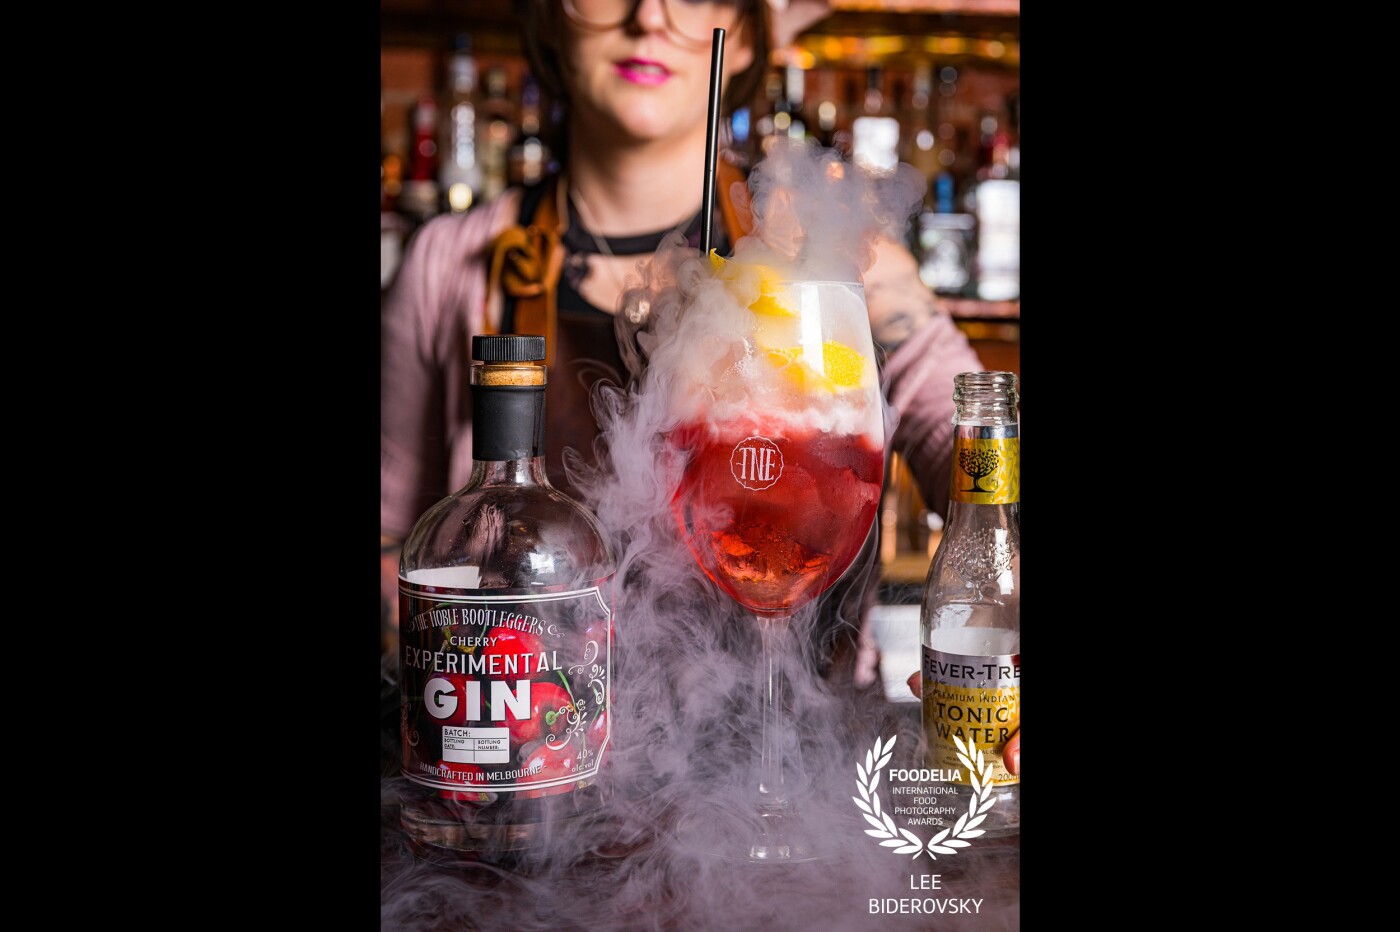 This image was shot as part of a monthly social media photo shoot for a restaurant in Collingwood, in Melbourne. For this shot, we used natural light and lots of dry ice, which is so much fun to play with. We had heaps of fun creating this series!! 